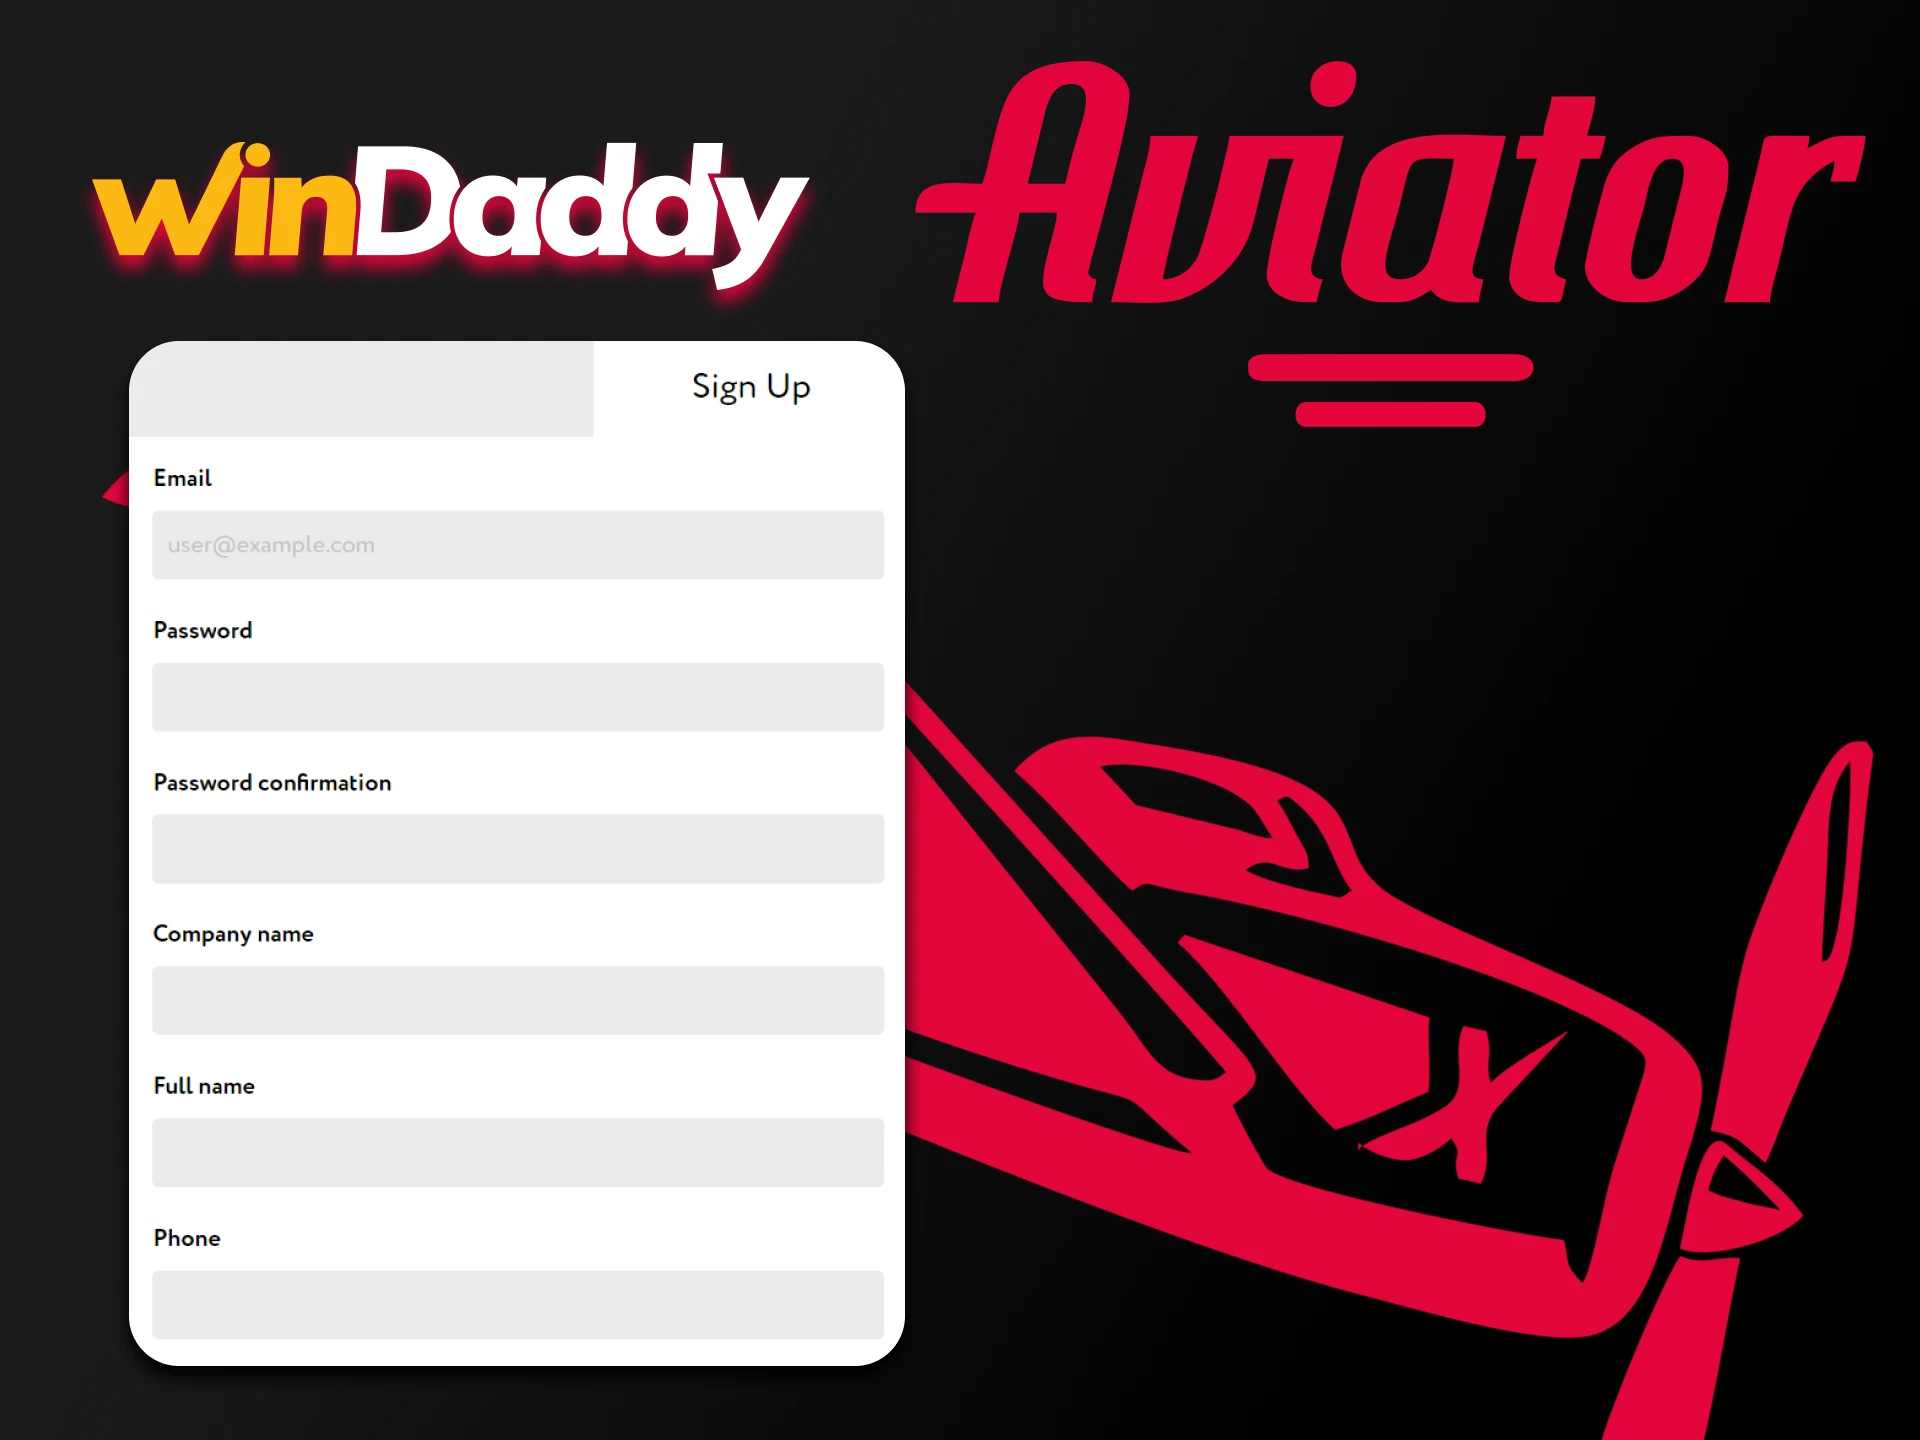 Go through the registration process on WinDaddy to play Aviator.